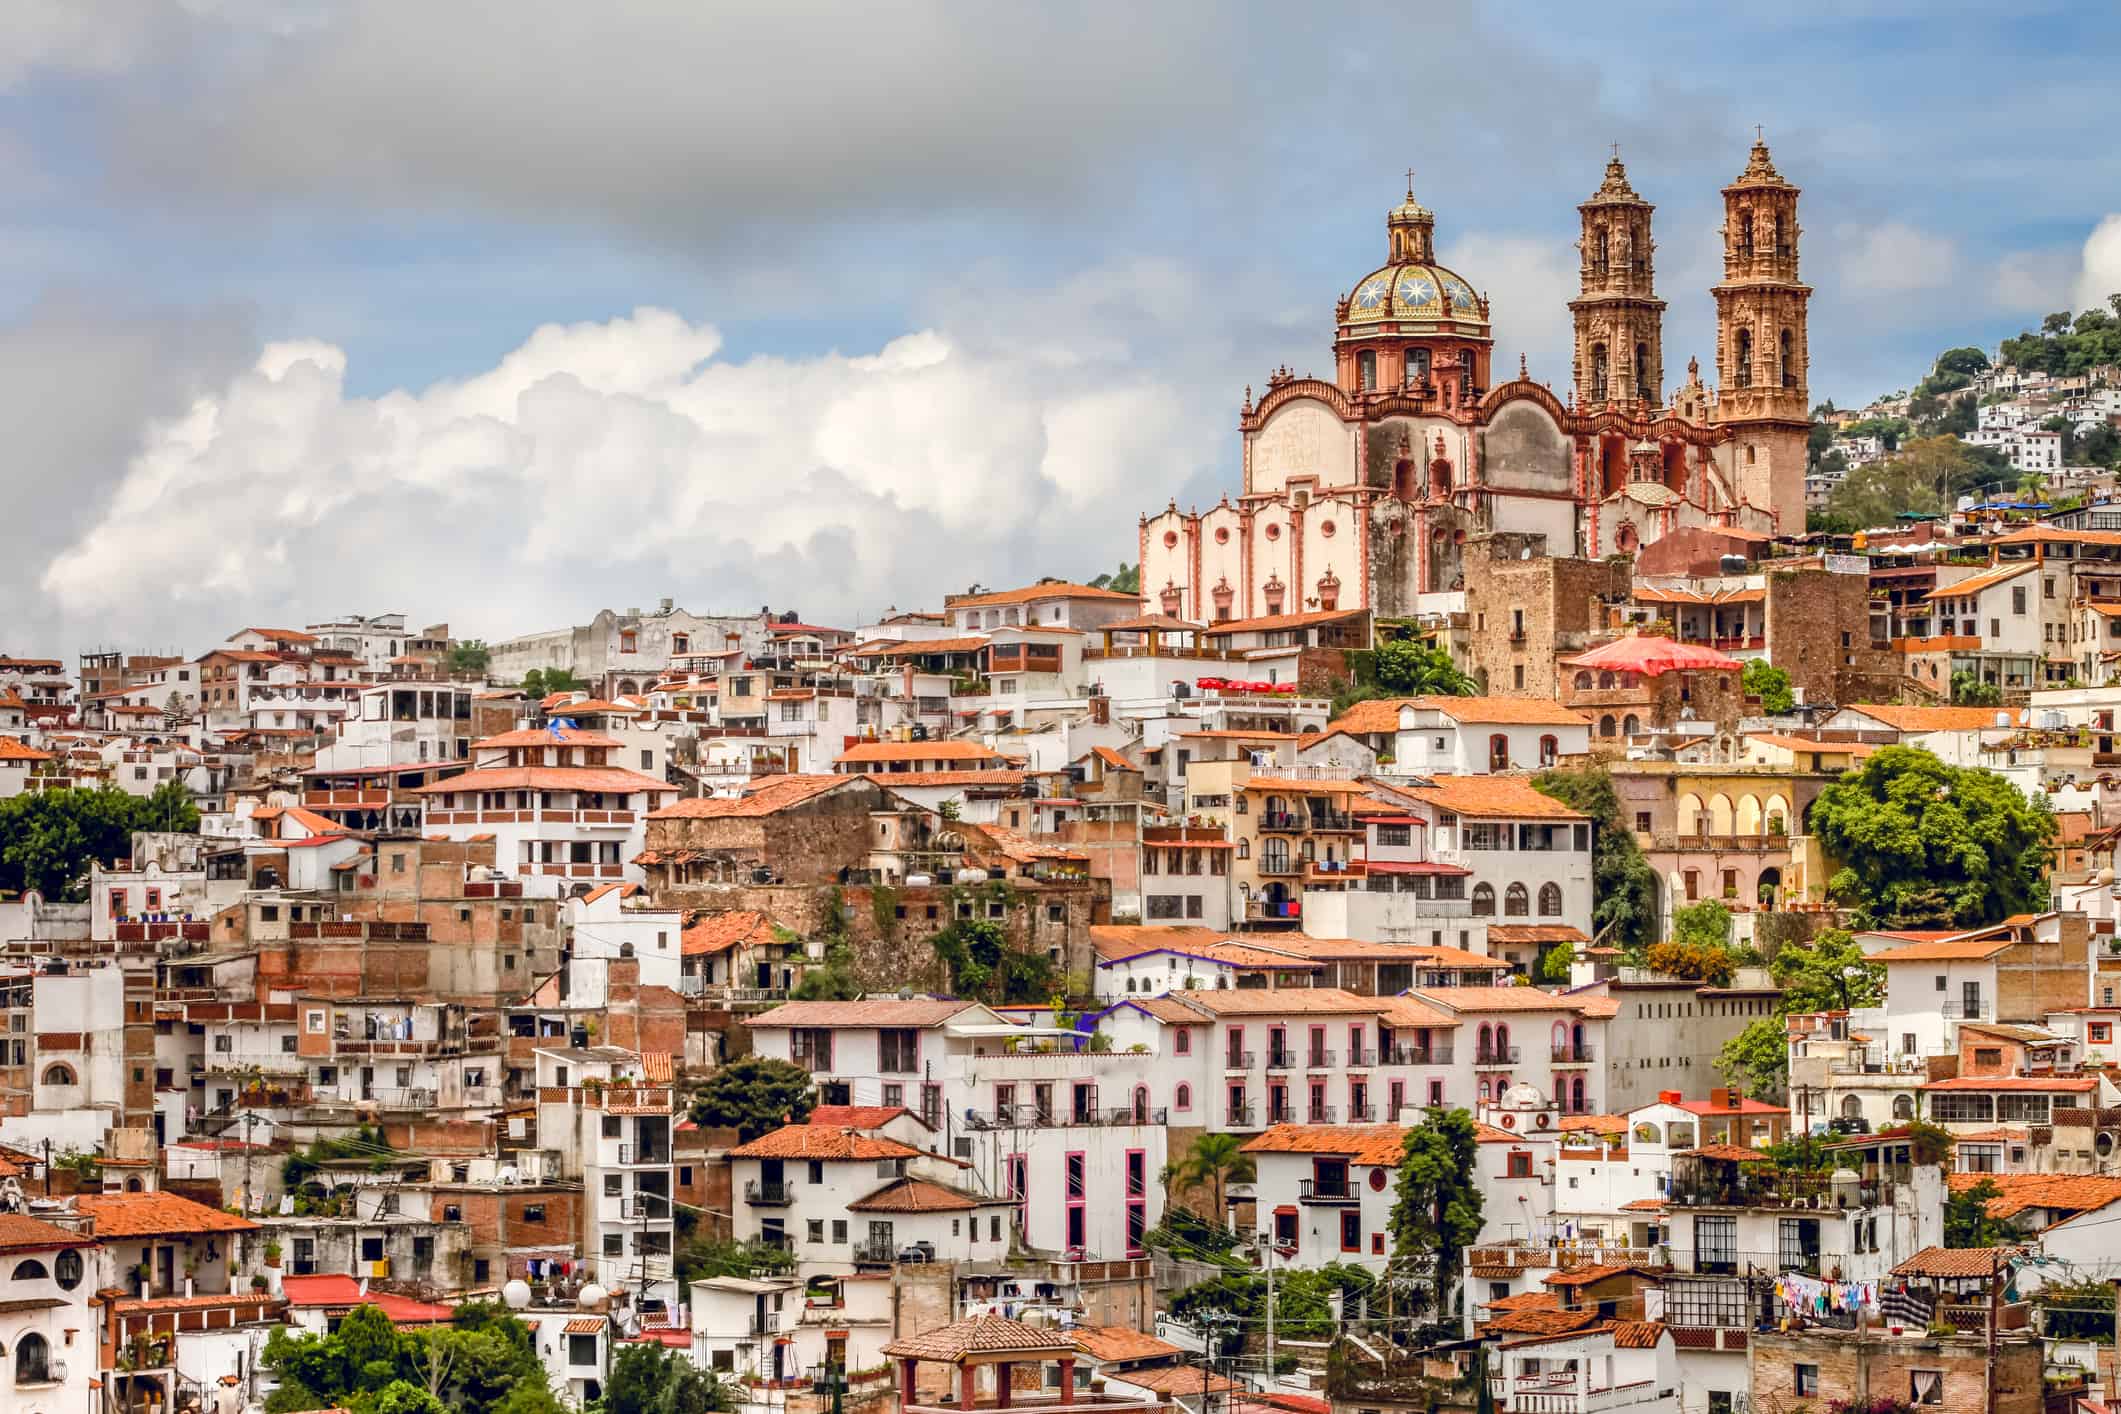 A beautiful cityscape of the historic center of Taxco in the state of Guerrero in central Mexico